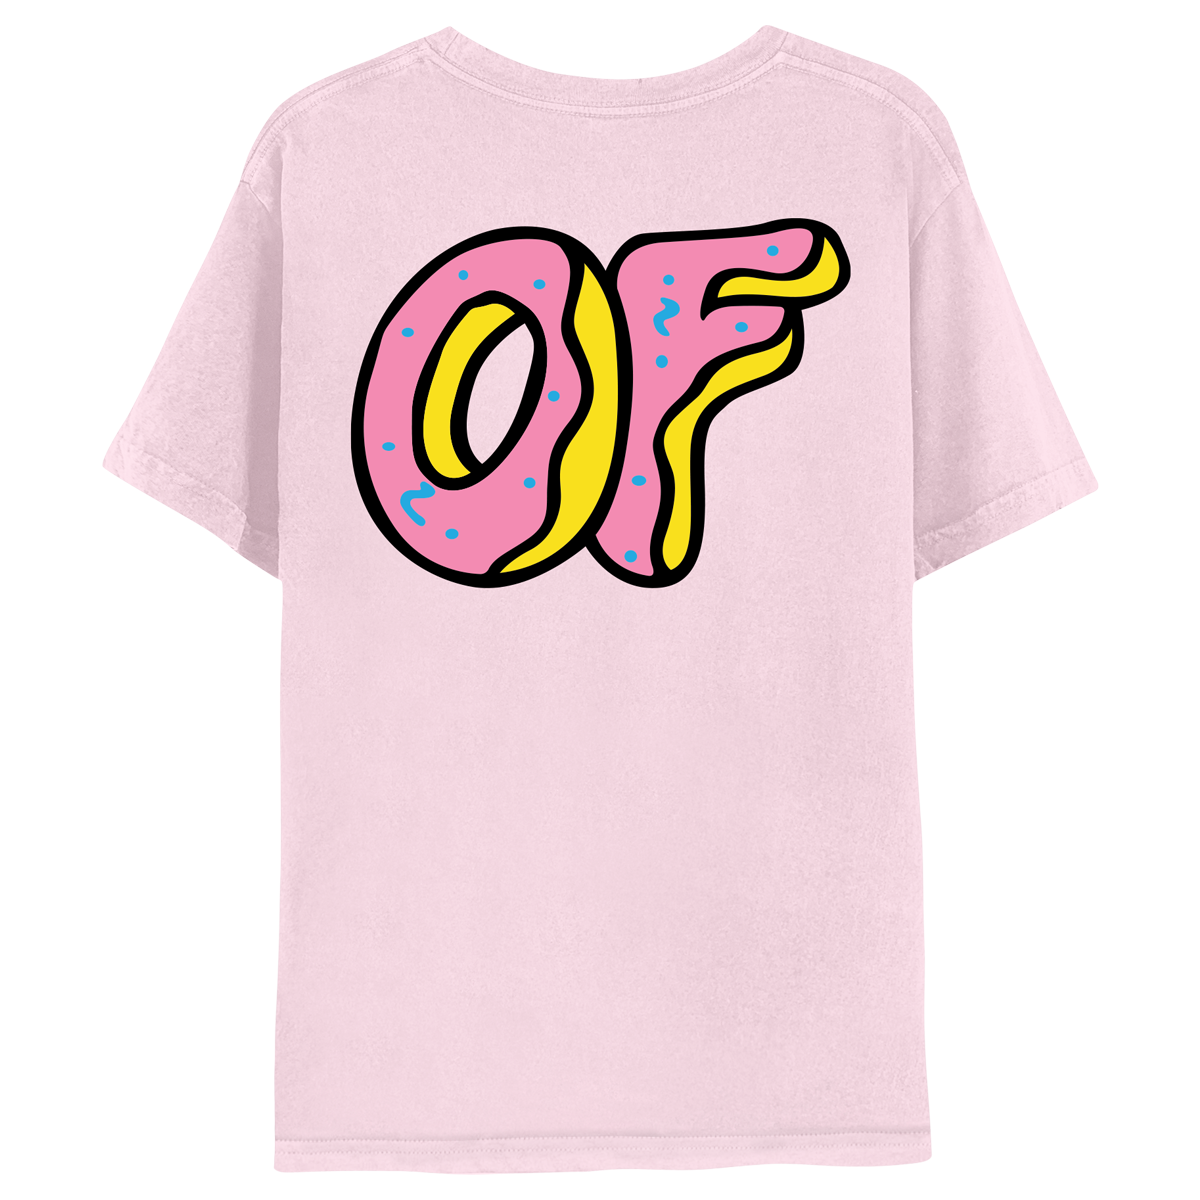 Sellout or Swag? The Runaway Success of Odd Future's Pink Donut